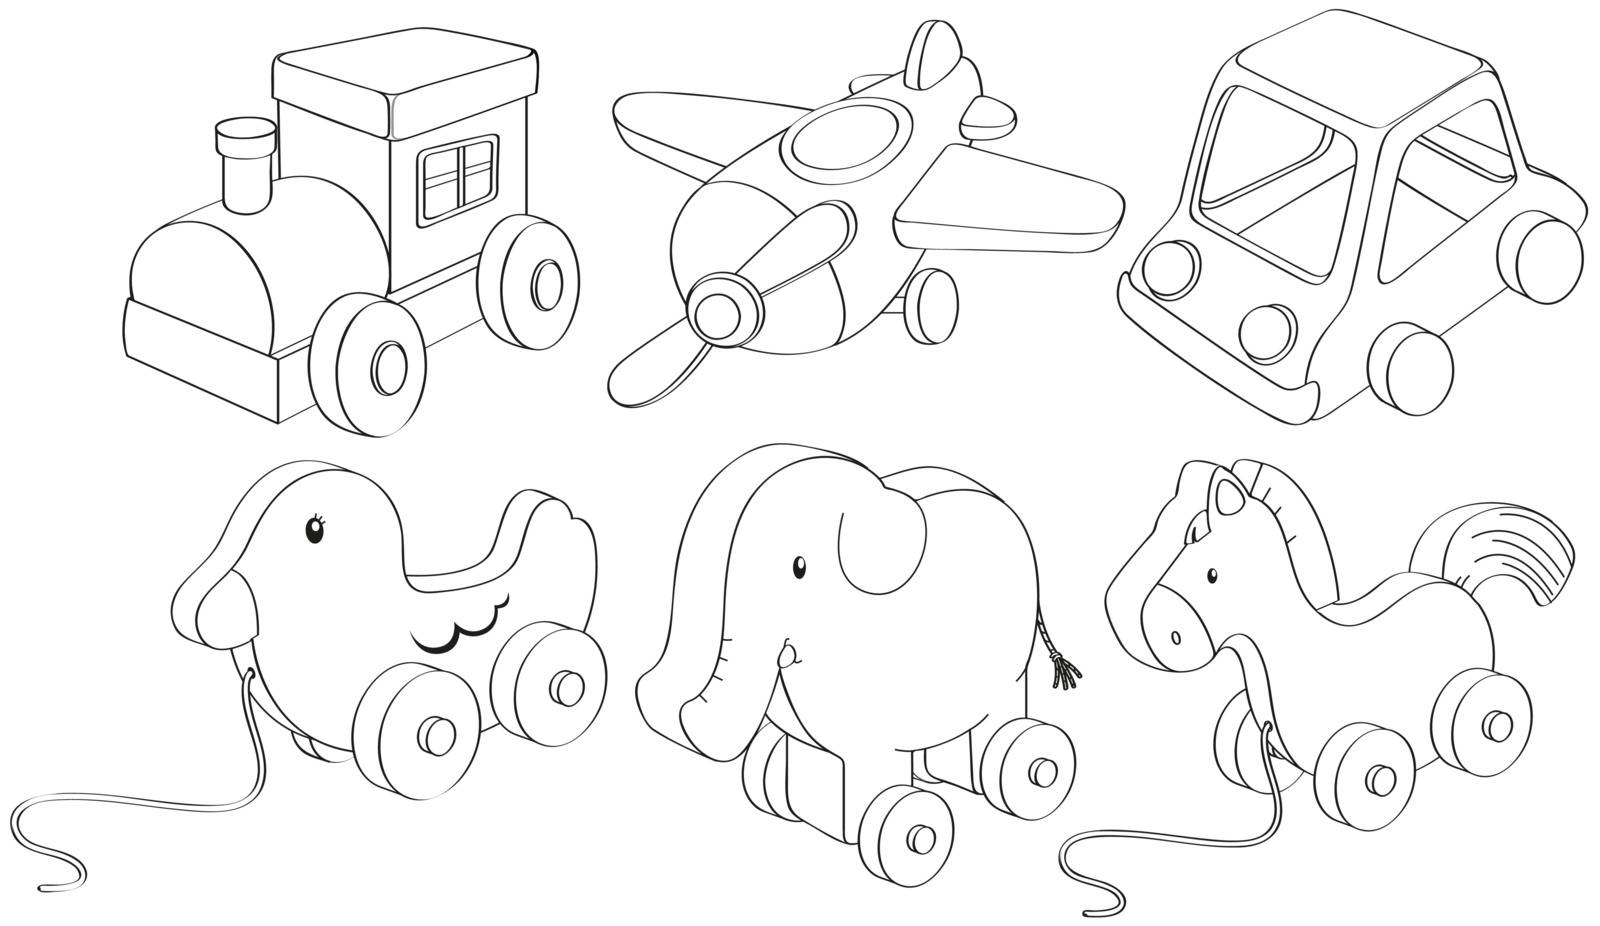 Illustration of the doodle designs of toys on a white background